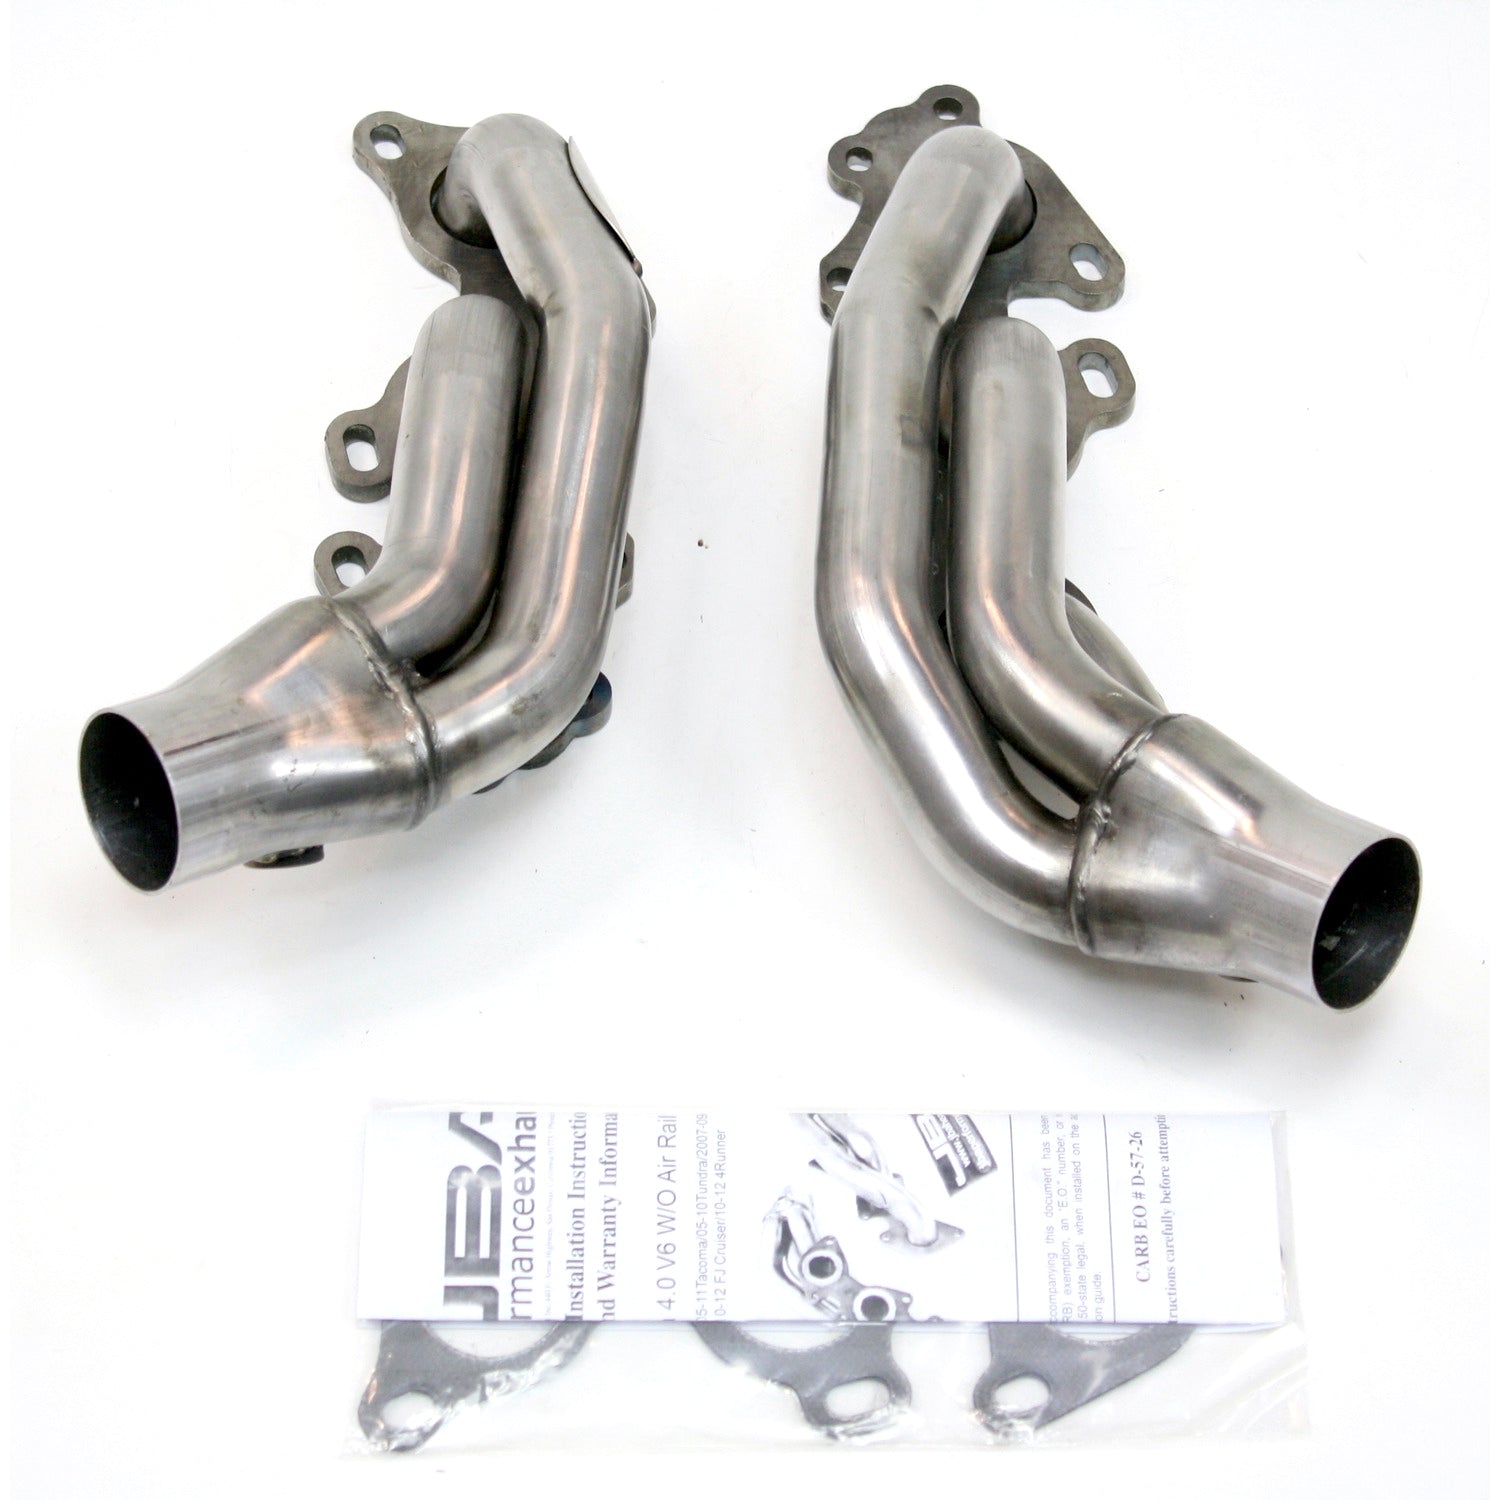 JBA Performance Exhaust 2035S-1 1 1/2" Header Shorty Stainless Steel 10-12 FJ; 10-12 4Runner 4.0L w/o Air Injection